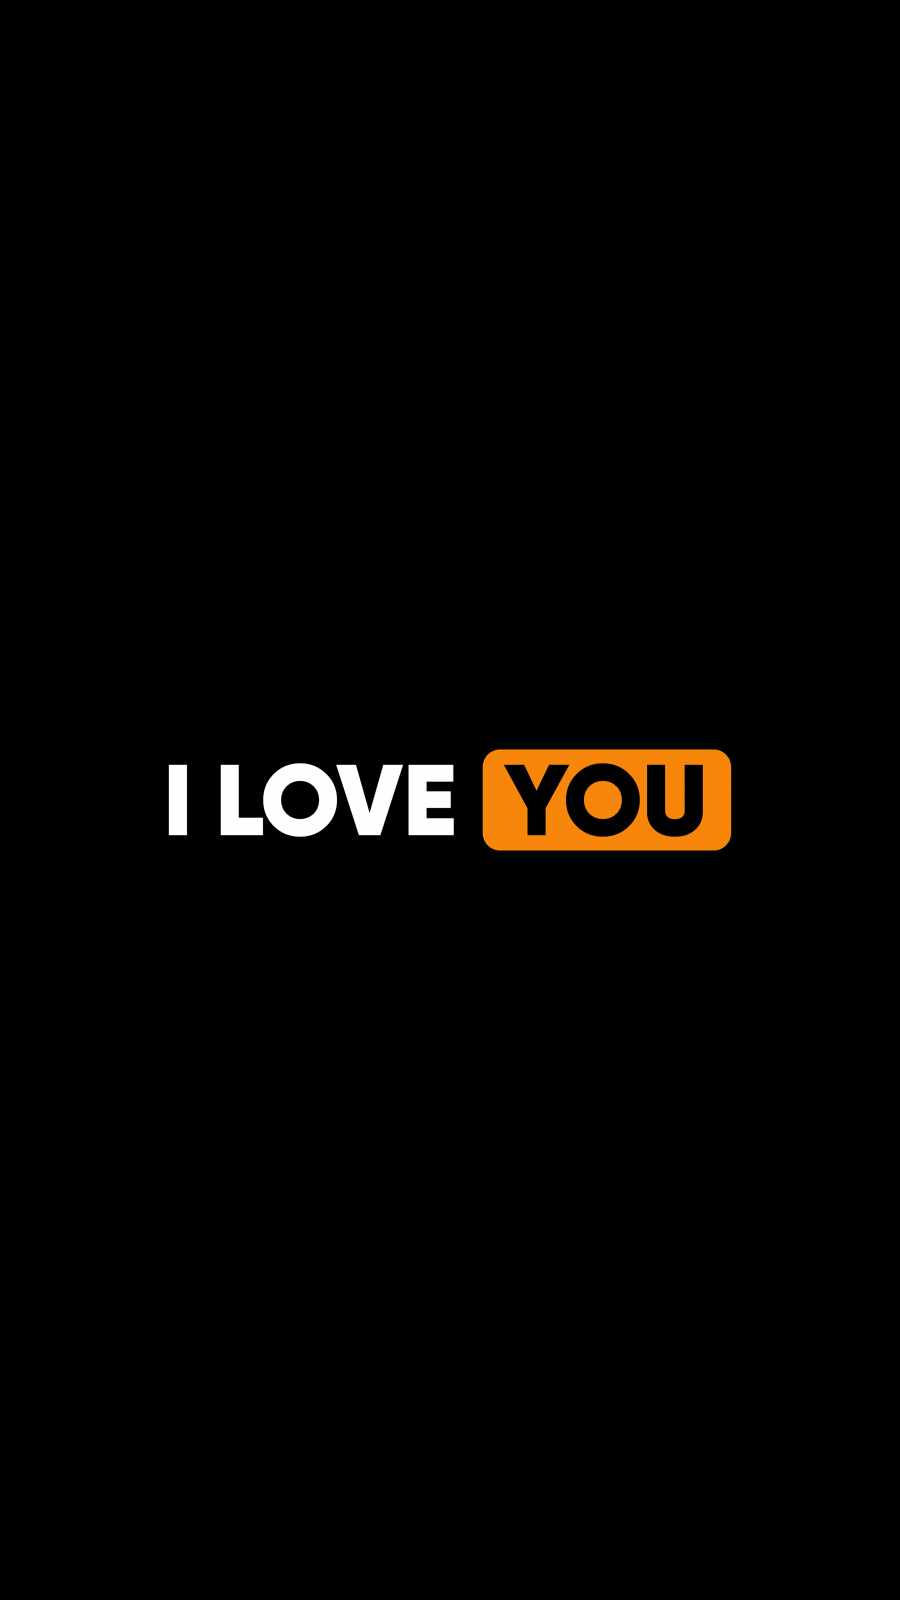 I Love You Like You Do IPhone Wallpaper  IPhone Wallpapers